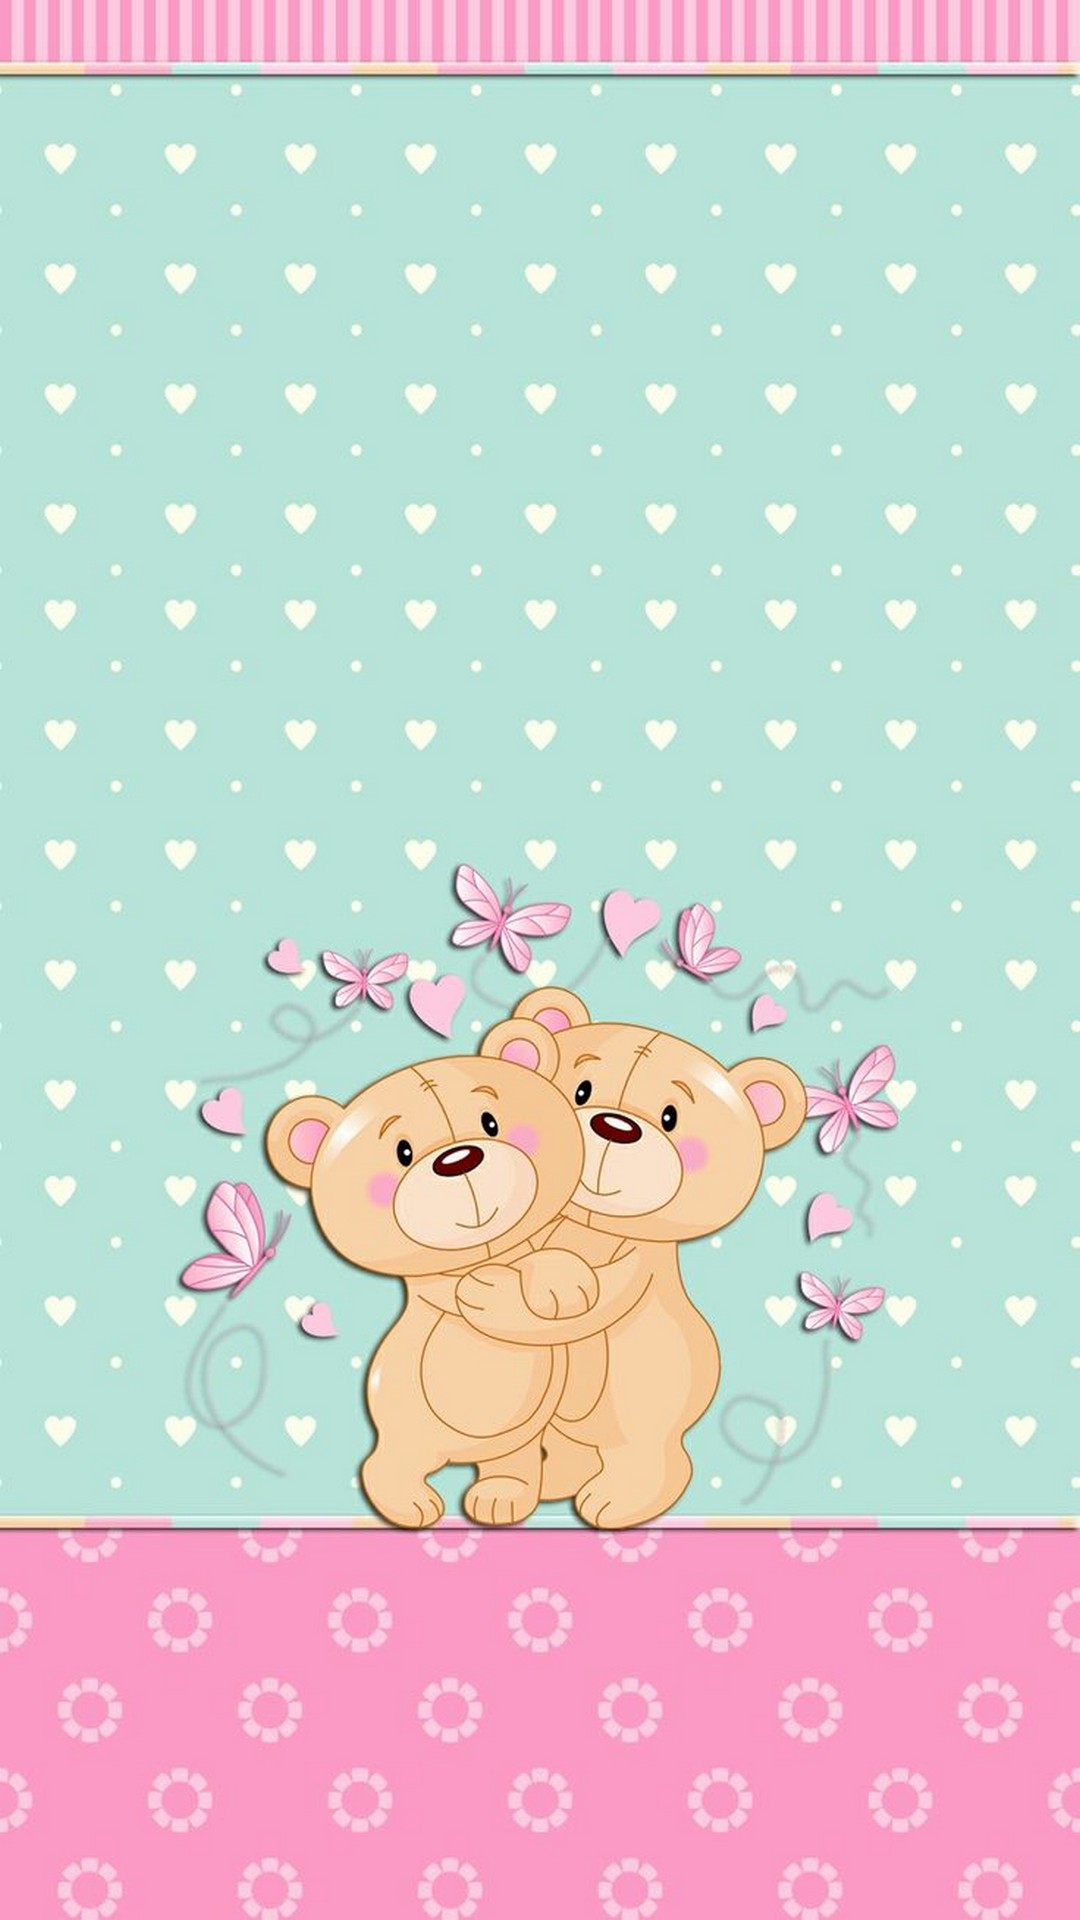 Valentines Day Cards Wallpaper Android